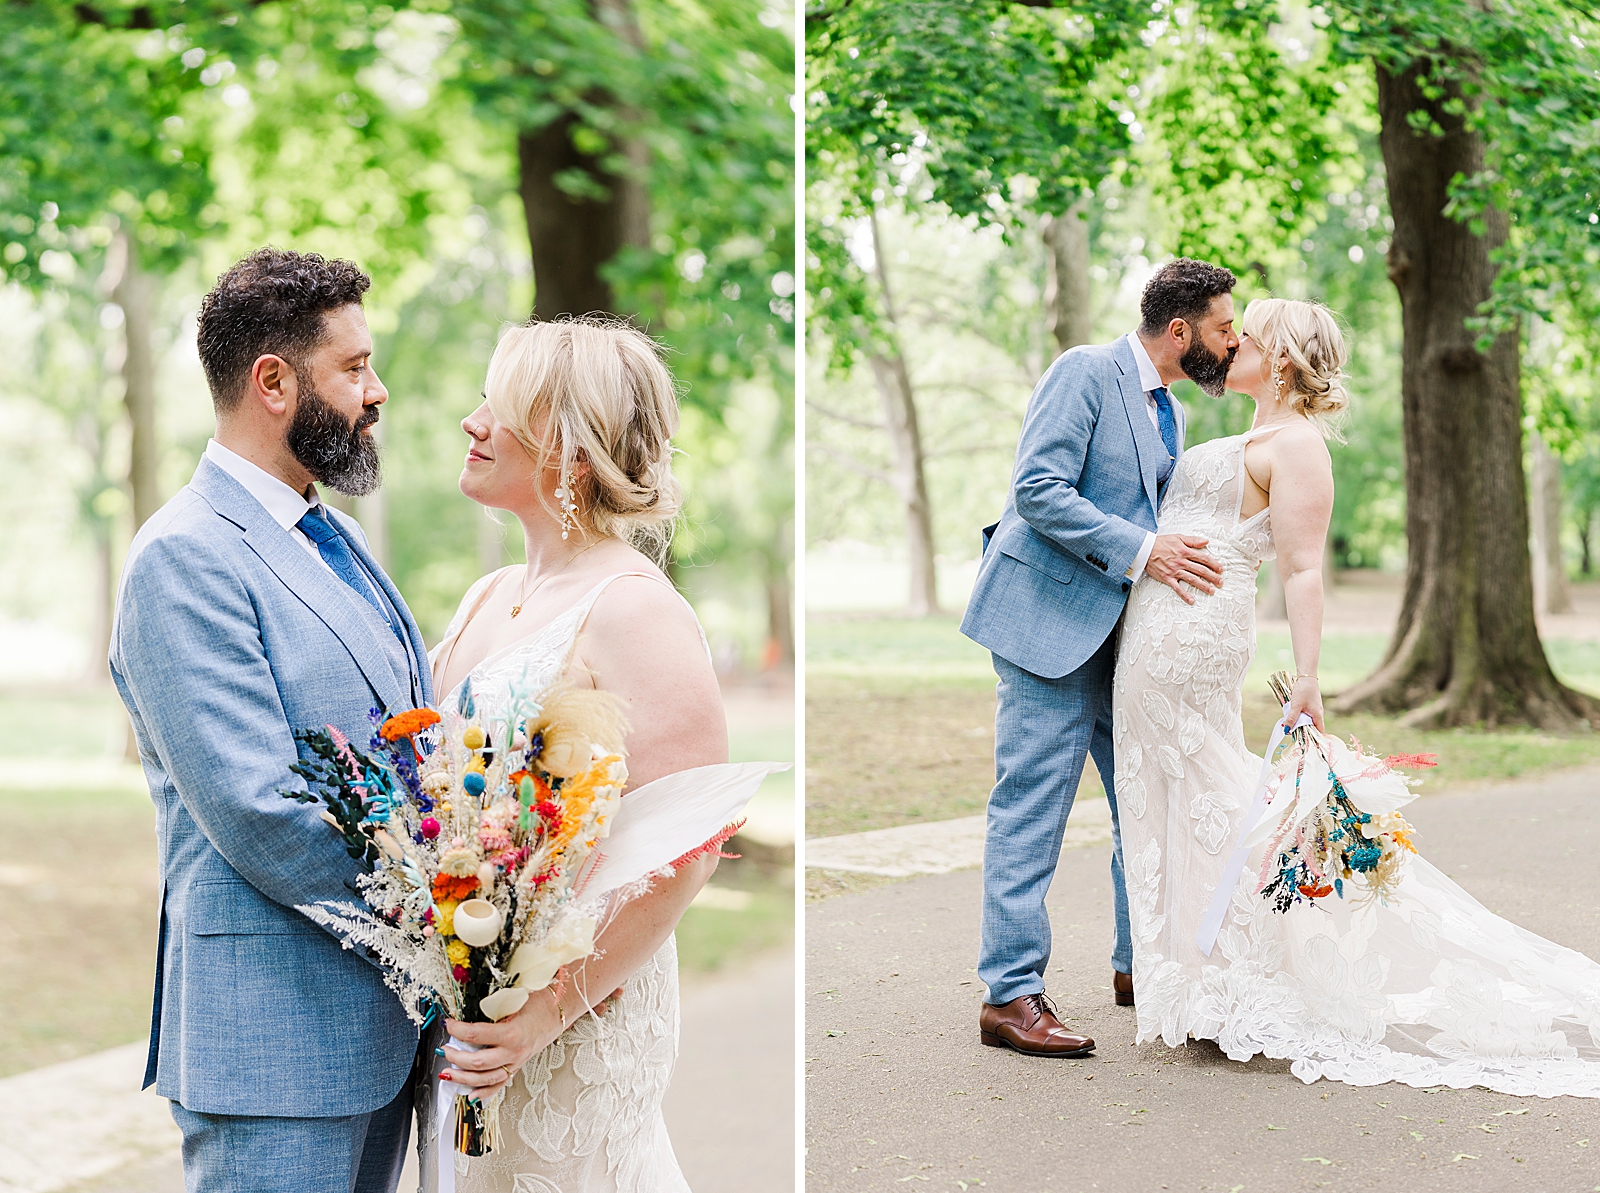 Left: Shot of MK and Eliseo gazing into each others eyes on a park path. 
Right: Photo of MK and Eliseo sharing a kiss on a park path.